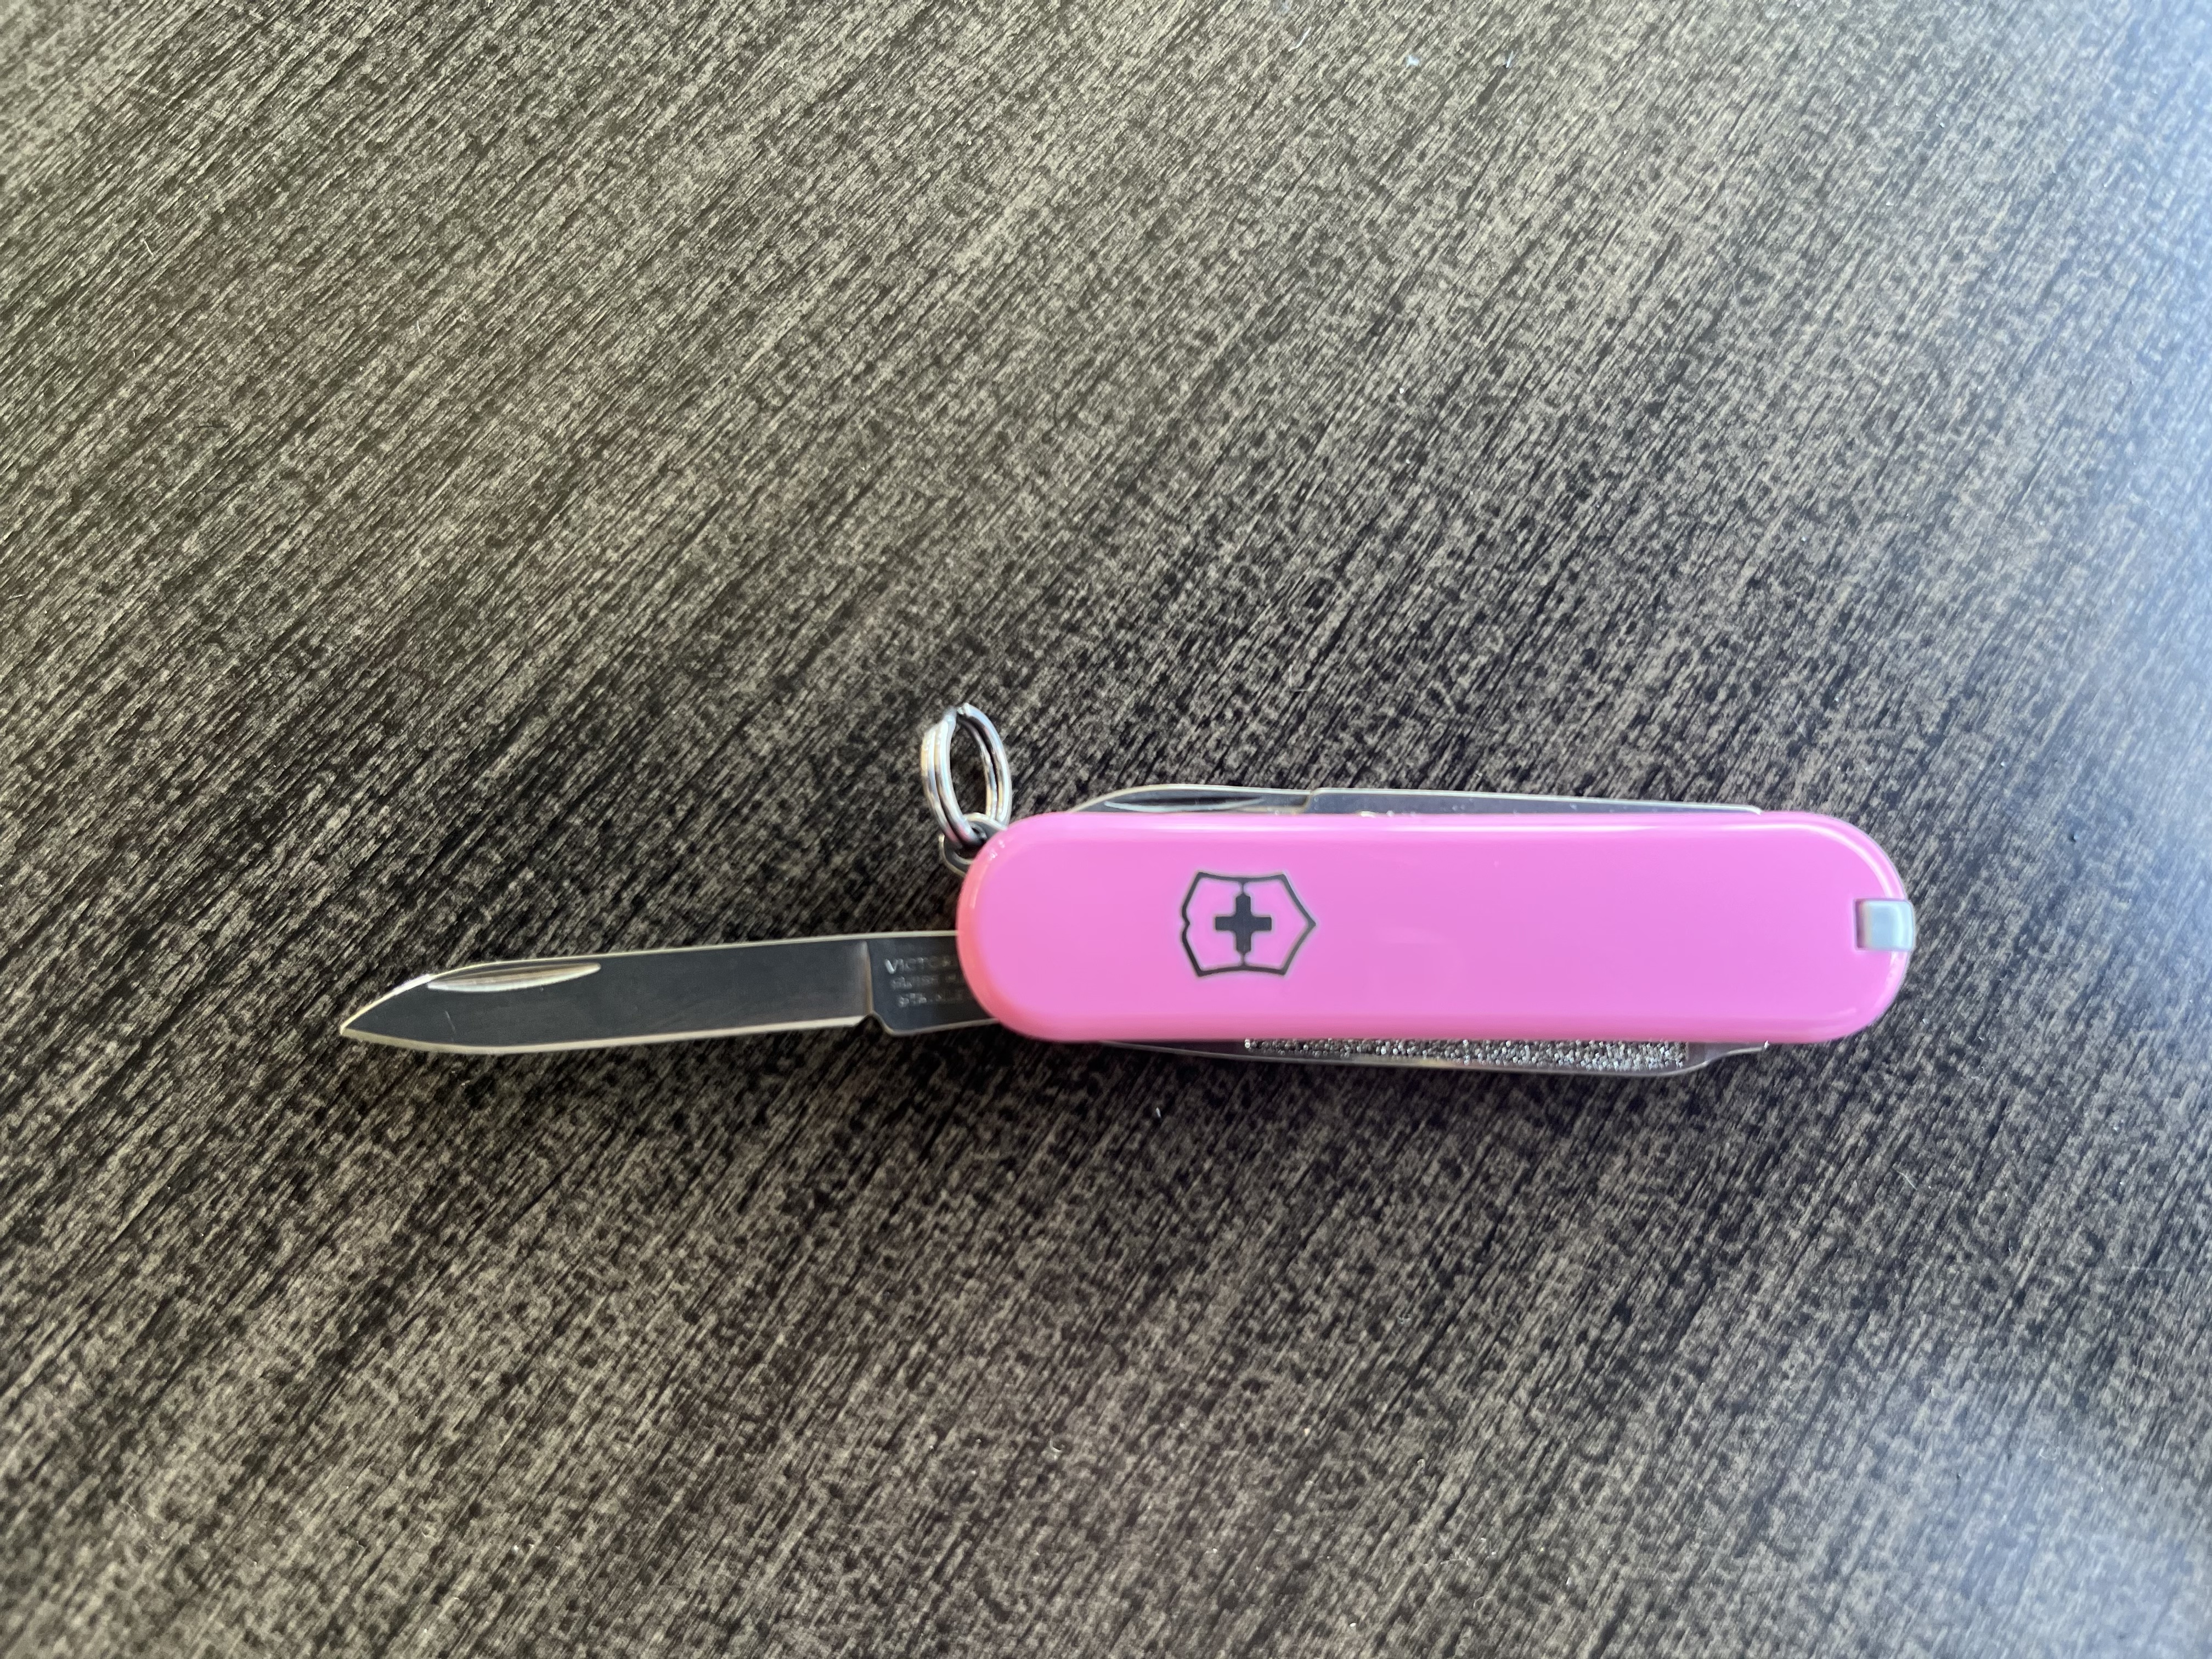 Victorinox Classic SD Swiss Army knife with knife out